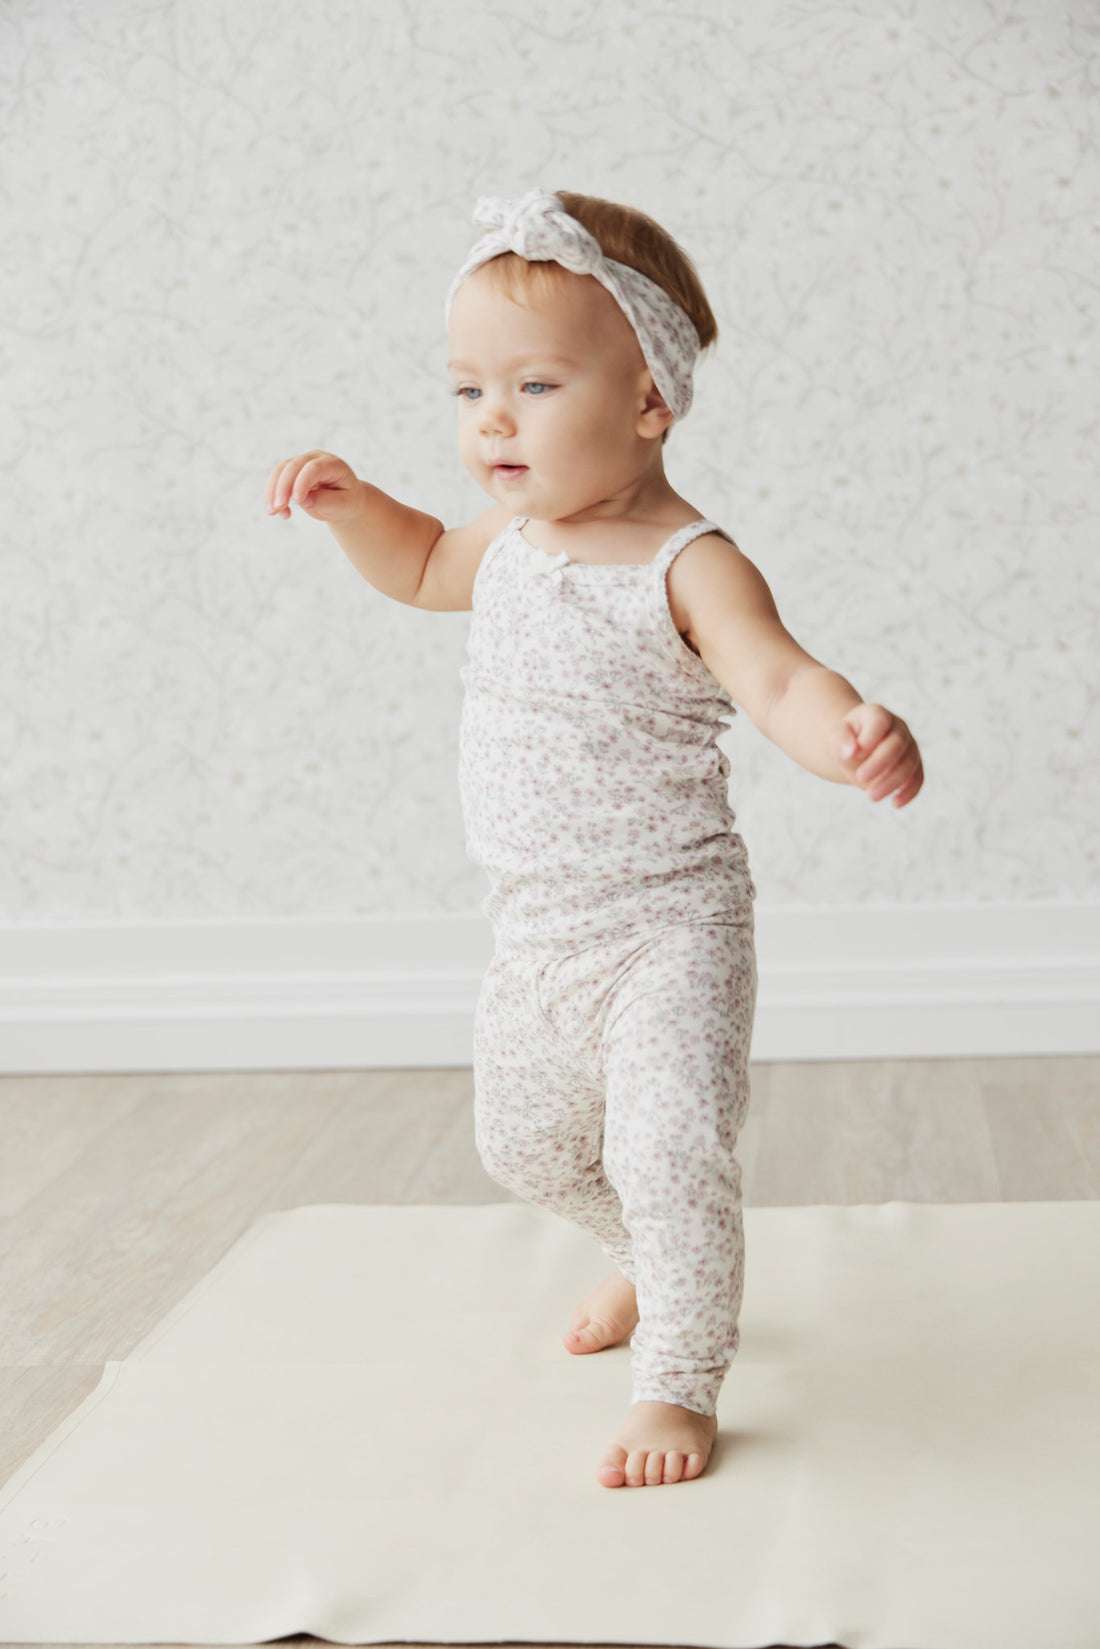 Organic Cotton Singlet - Posy Floral Childrens Singlet from Jamie Kay NZ